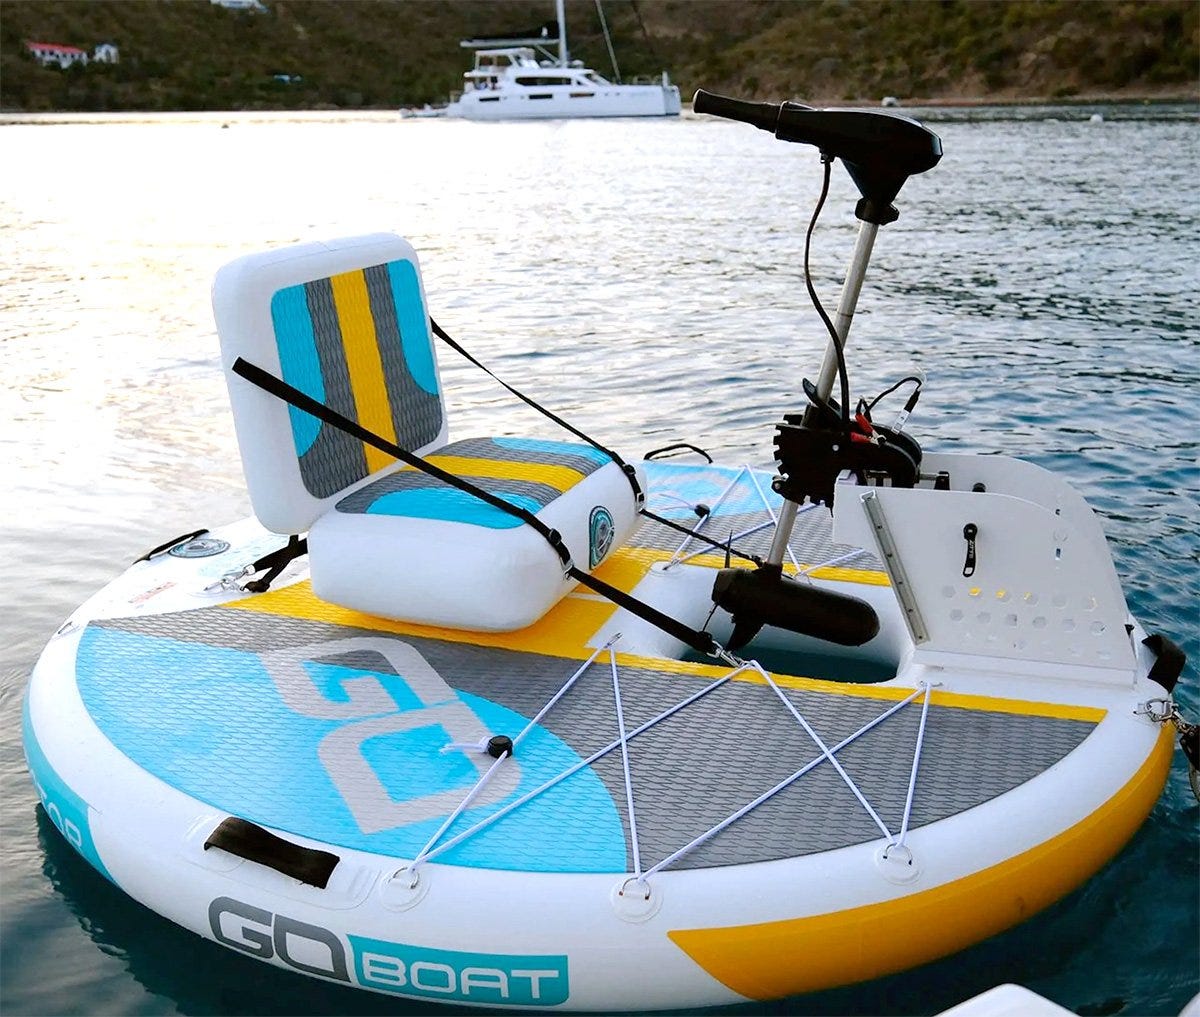 GoBoat unveils Gen 2.0 inflatable motorized craft